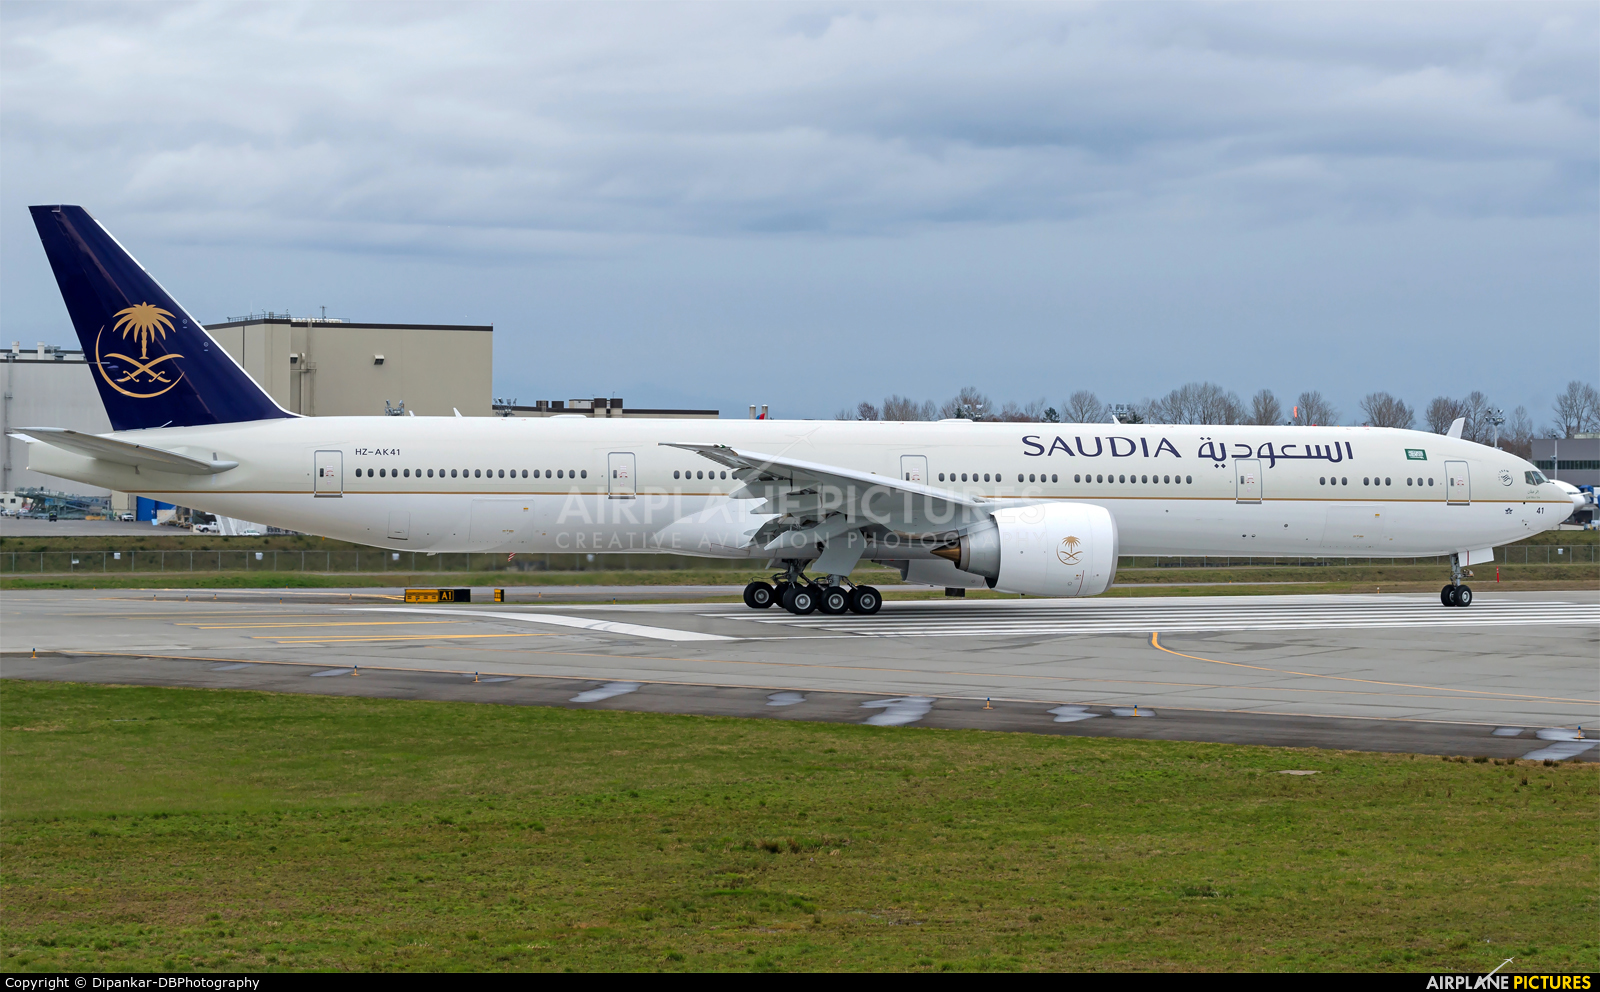 Saudi Arabian Airlines HZ-AK41 aircraft at Everett - Snohomish County / Paine Field